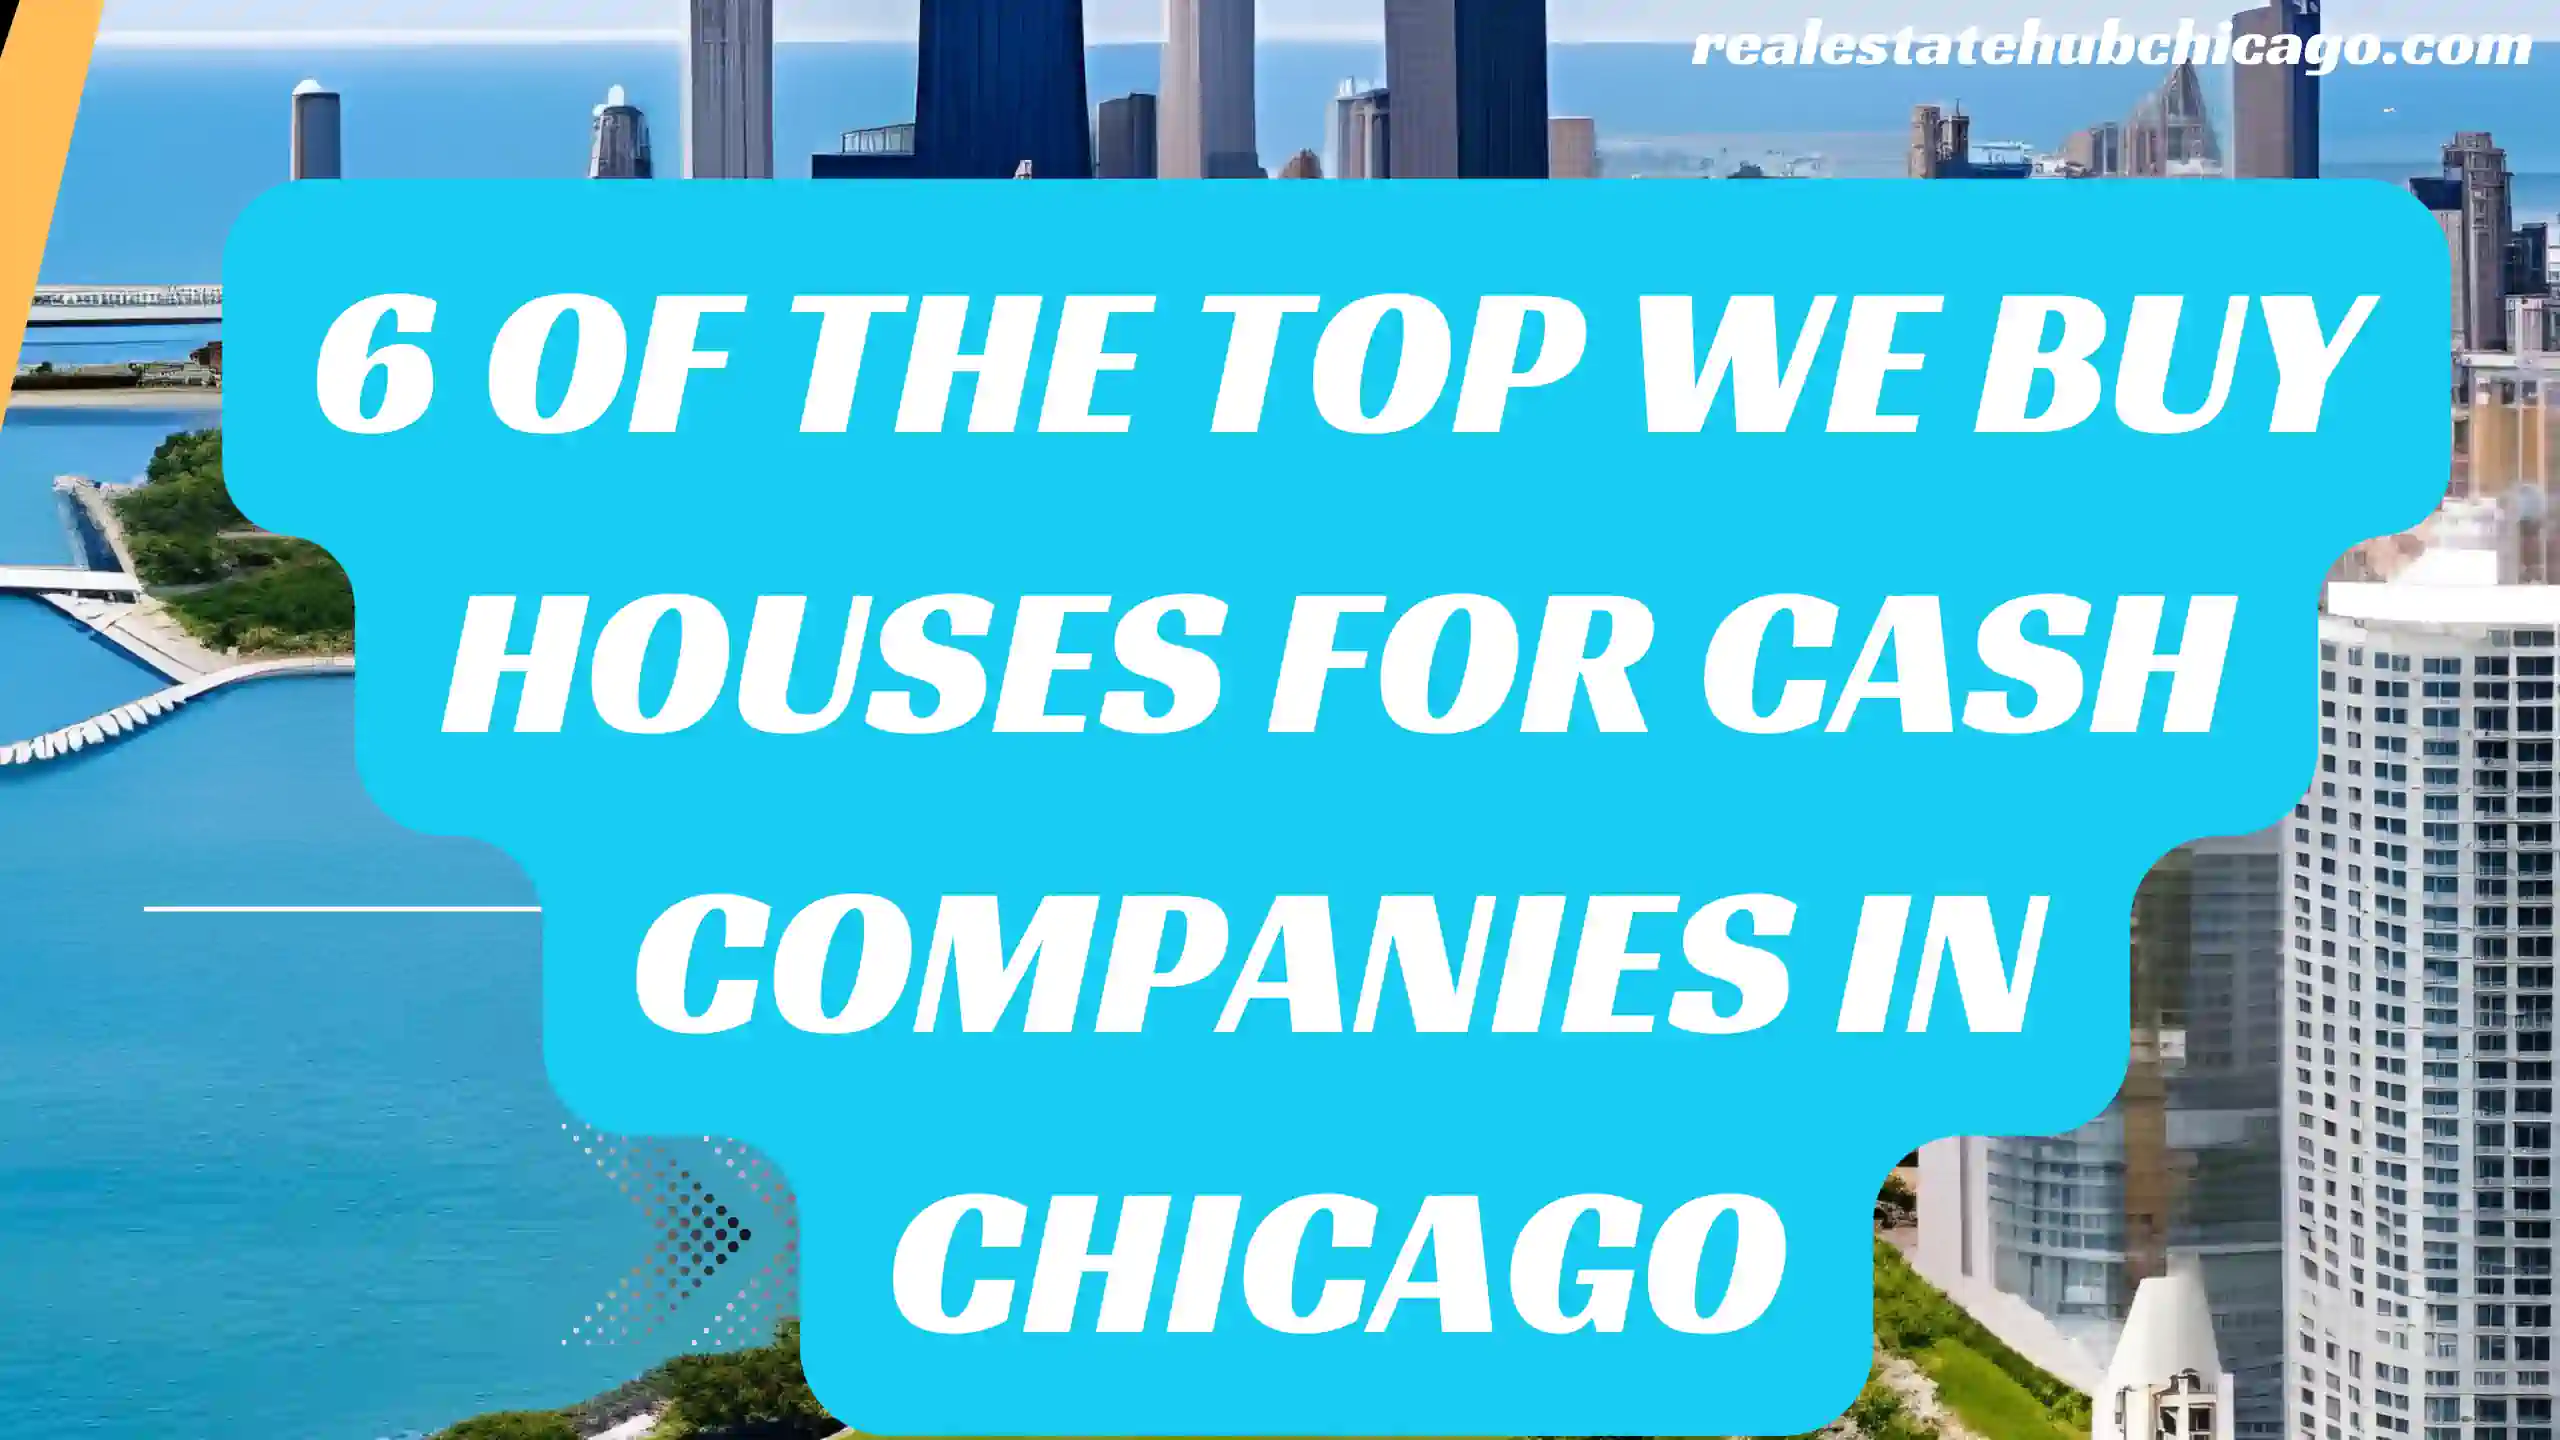 6 of the Top We Buy Houses for Cash Companies in Chicago